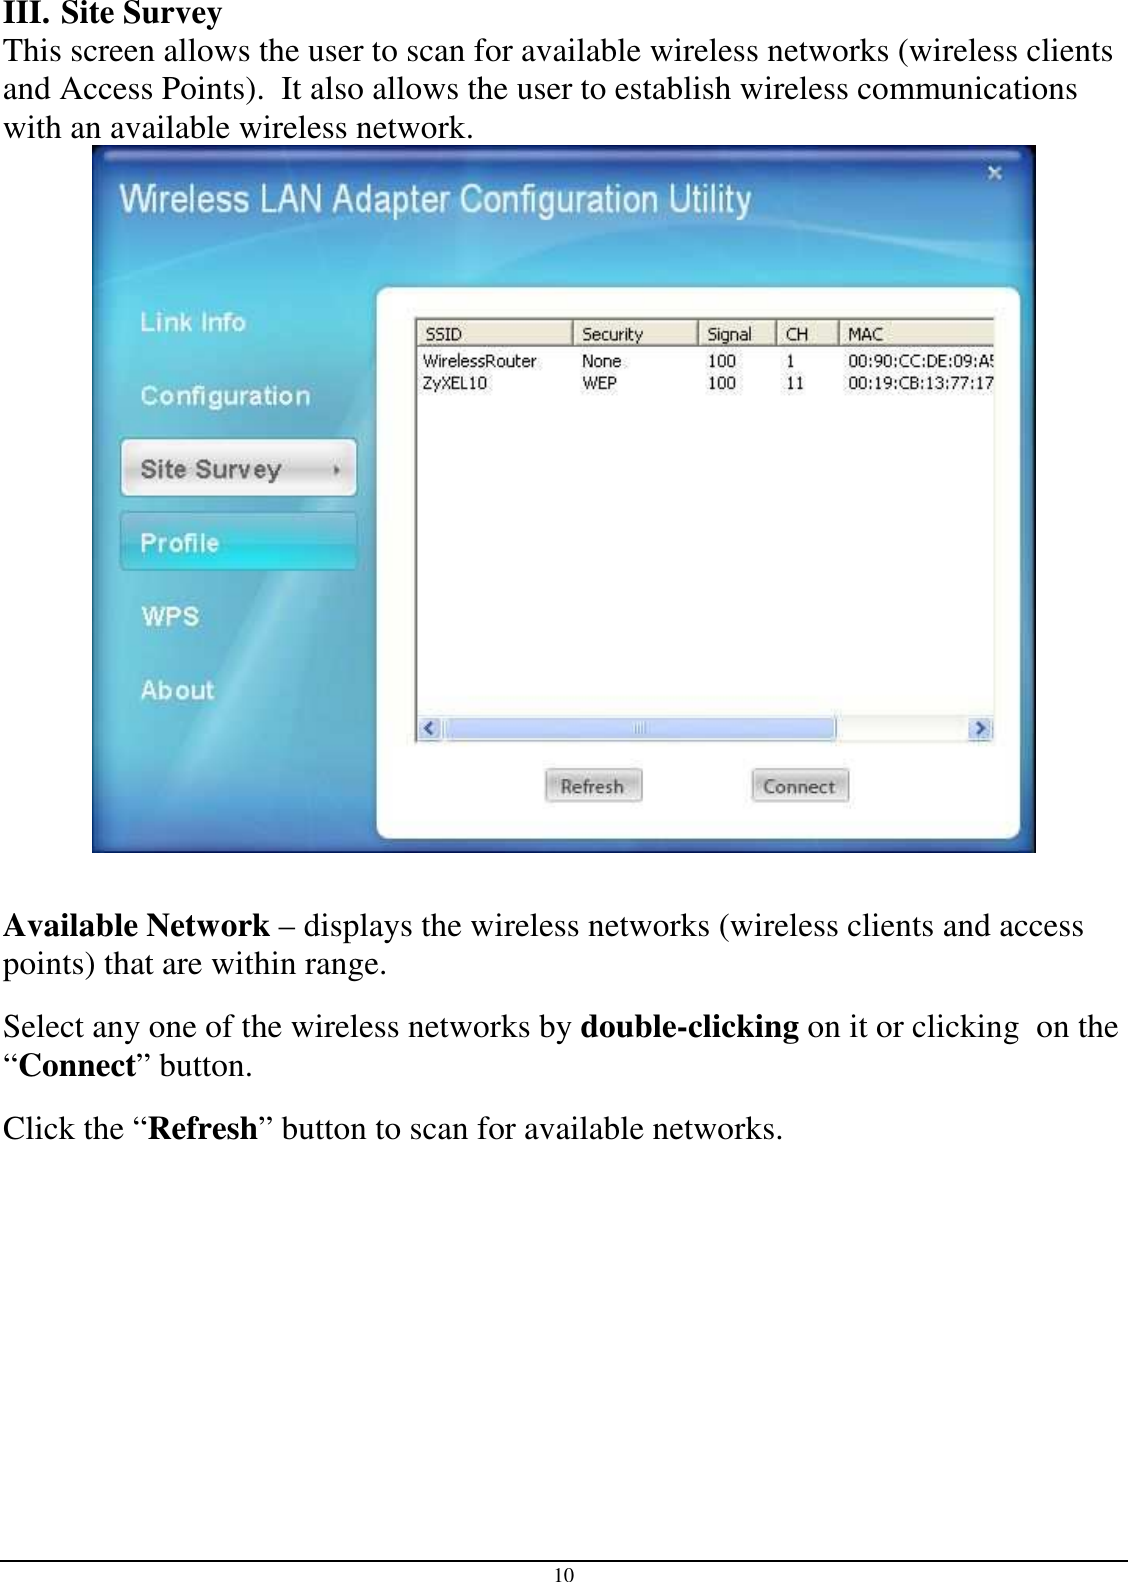 10 III.  Site Survey This screen allows the user to scan for available wireless networks (wireless clients and Access Points).  It also allows the user to establish wireless communications with an available wireless network.   Available Network – displays the wireless networks (wireless clients and access points) that are within range.  Select any one of the wireless networks by double-clicking on it or clicking  on the “Connect” button. Click the “Refresh” button to scan for available networks.       